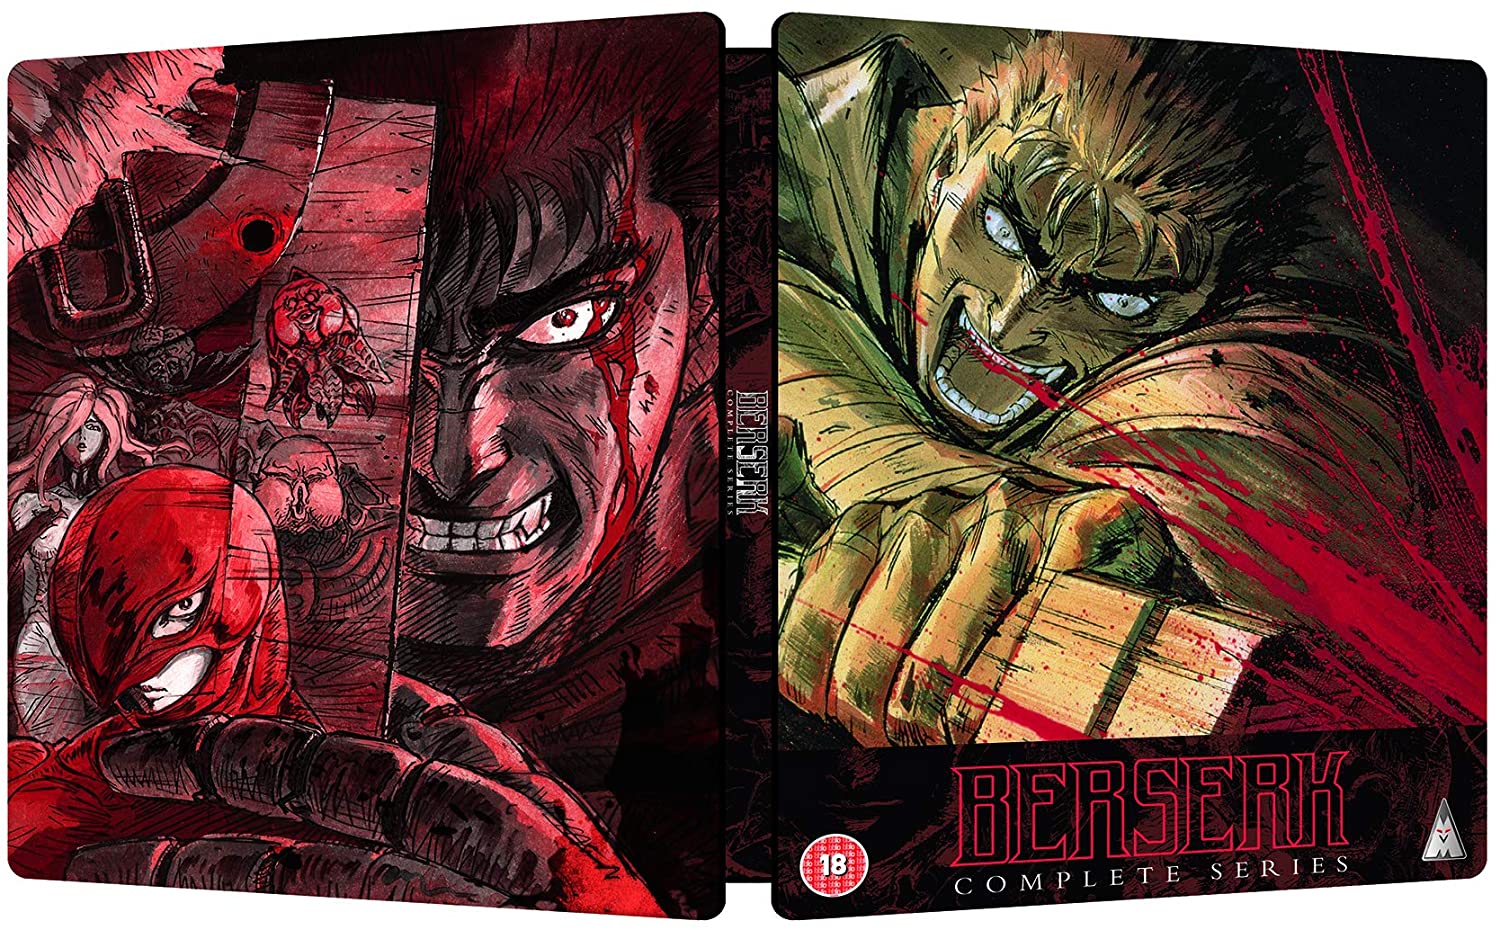 Berserk 1997 Blu-ray Box First Limited Edition From Japan